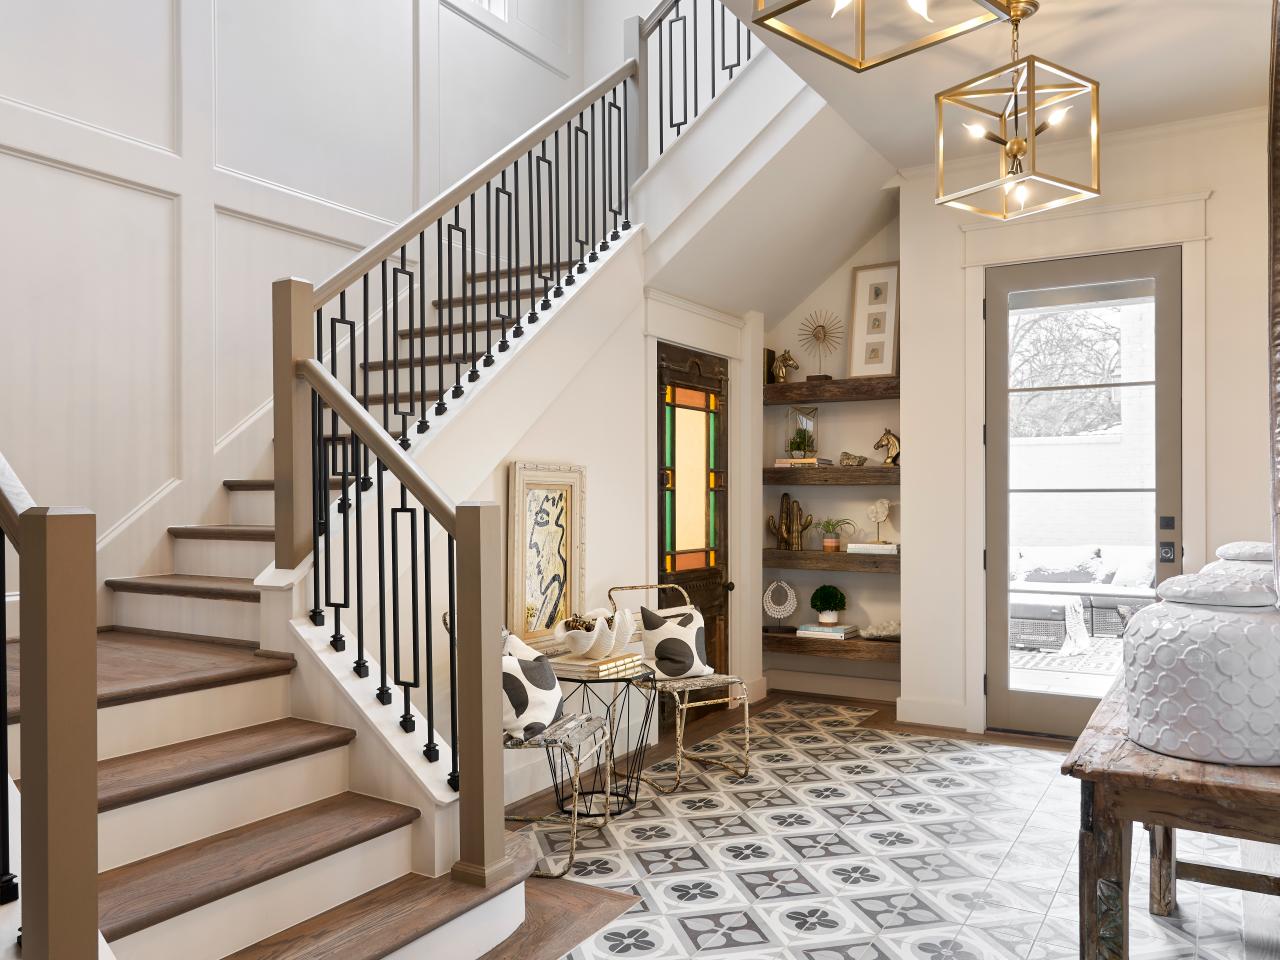 30 Stair Railing Ideas To Update Your Boring Staircase